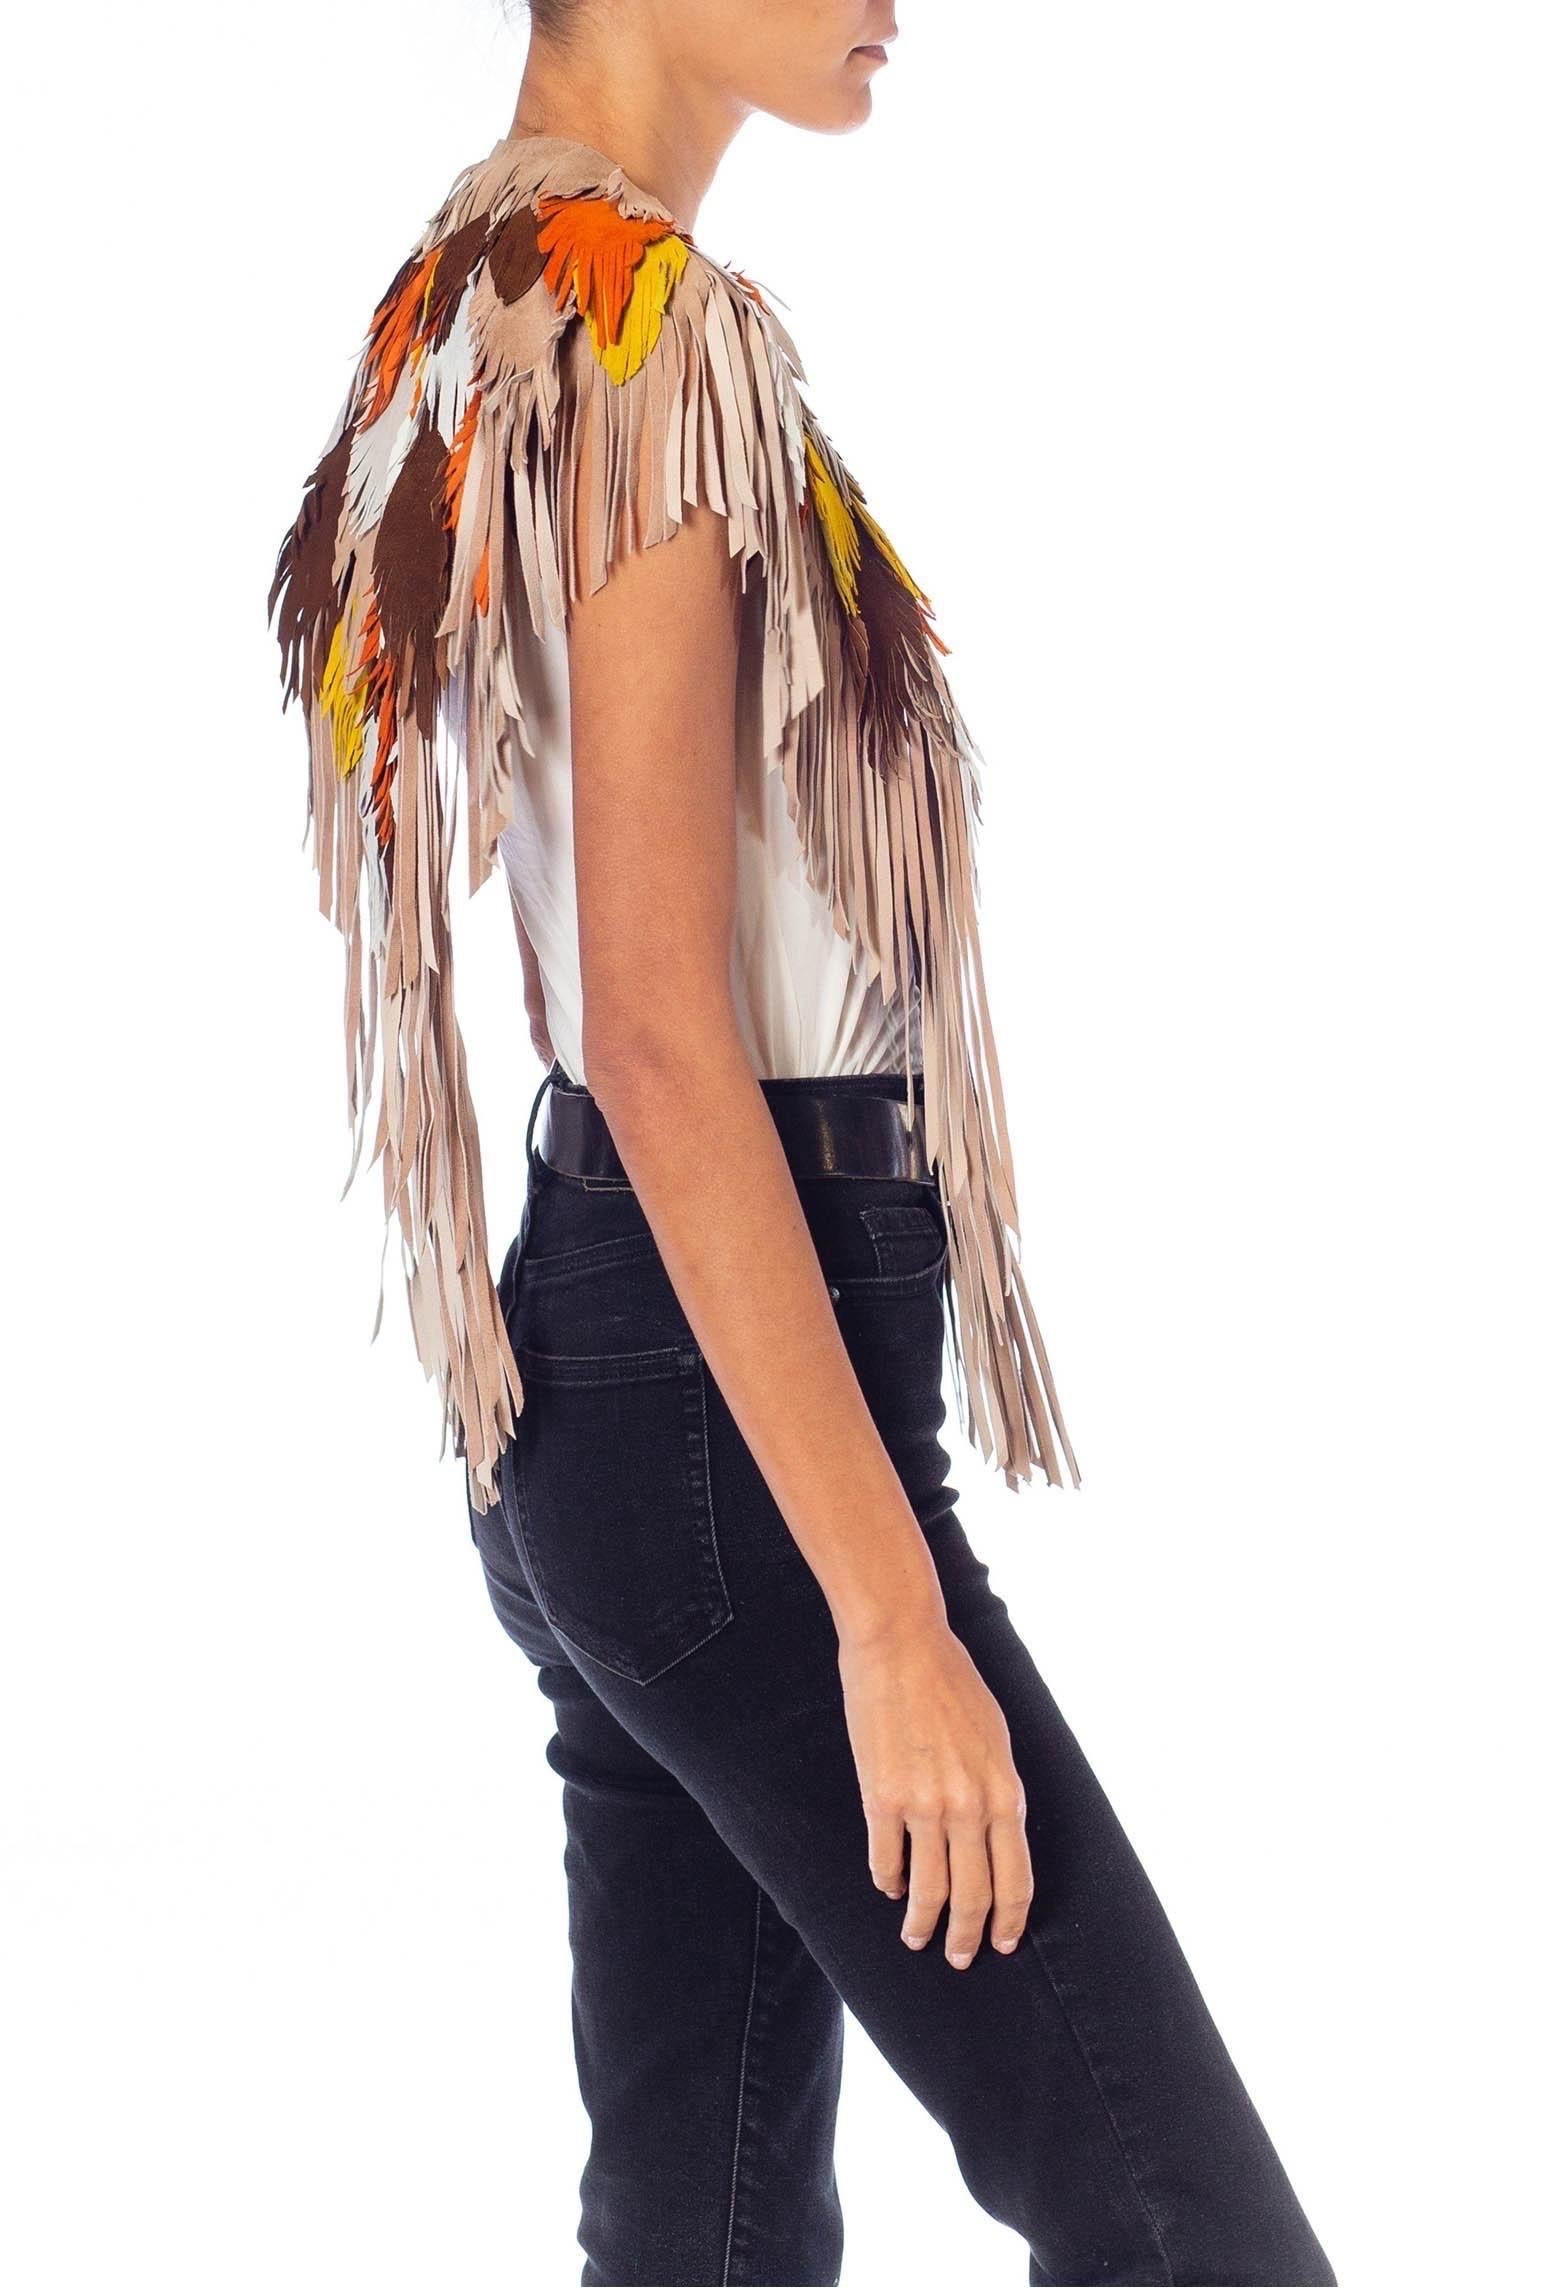 Women's or Men's MORPHEW COLLECTION Phoenix Sunset Suede Fringe Feather Leather Cape For Sale